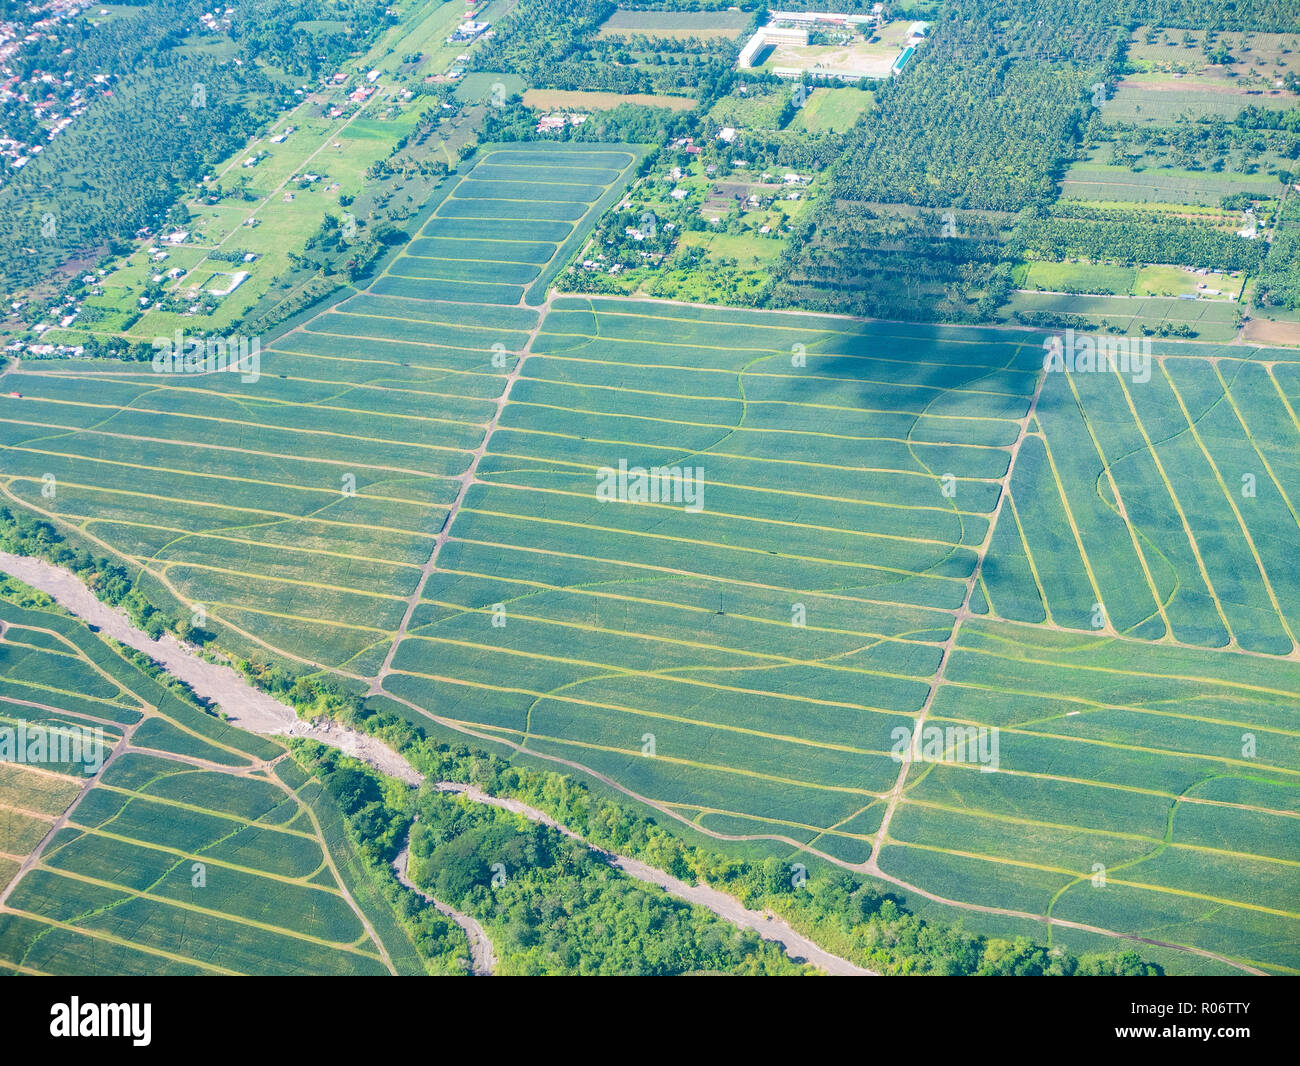 Aerial view of pineapple fields near General Santos City, South Cotabato Province on Mindanao, the southernmost island of the Philippines. Stock Photo